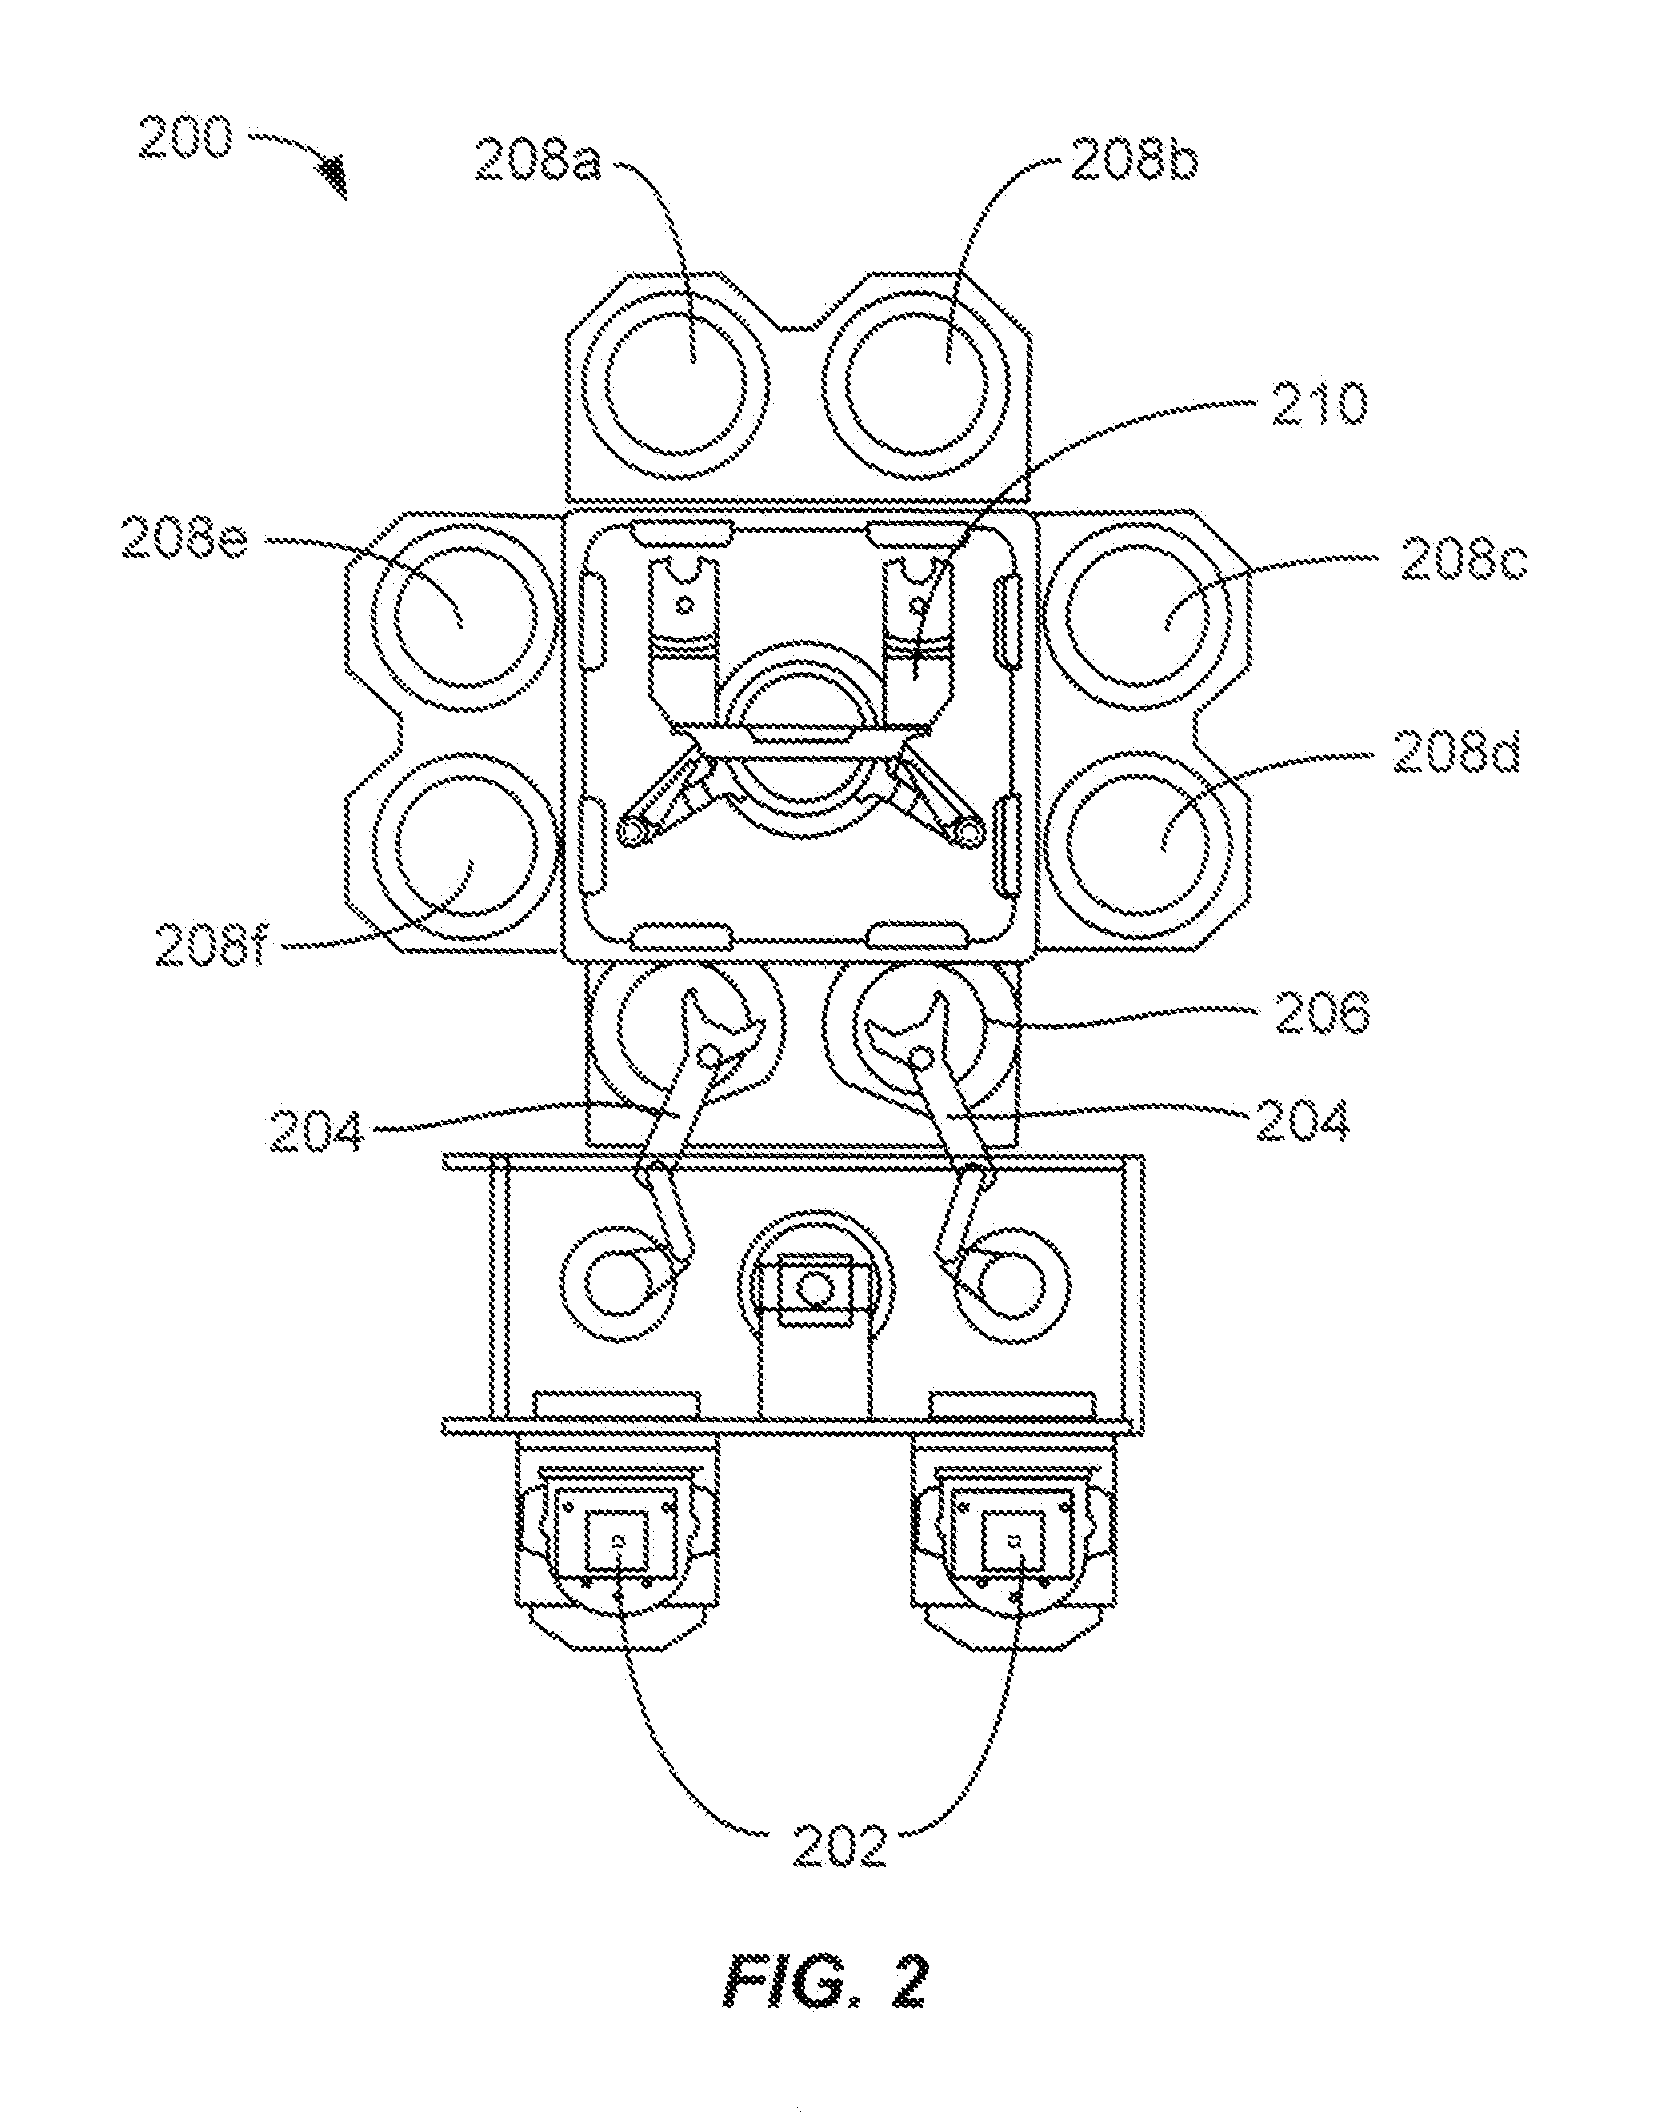 Flowable silicon-and-carbon-containing layers for semiconductor processing